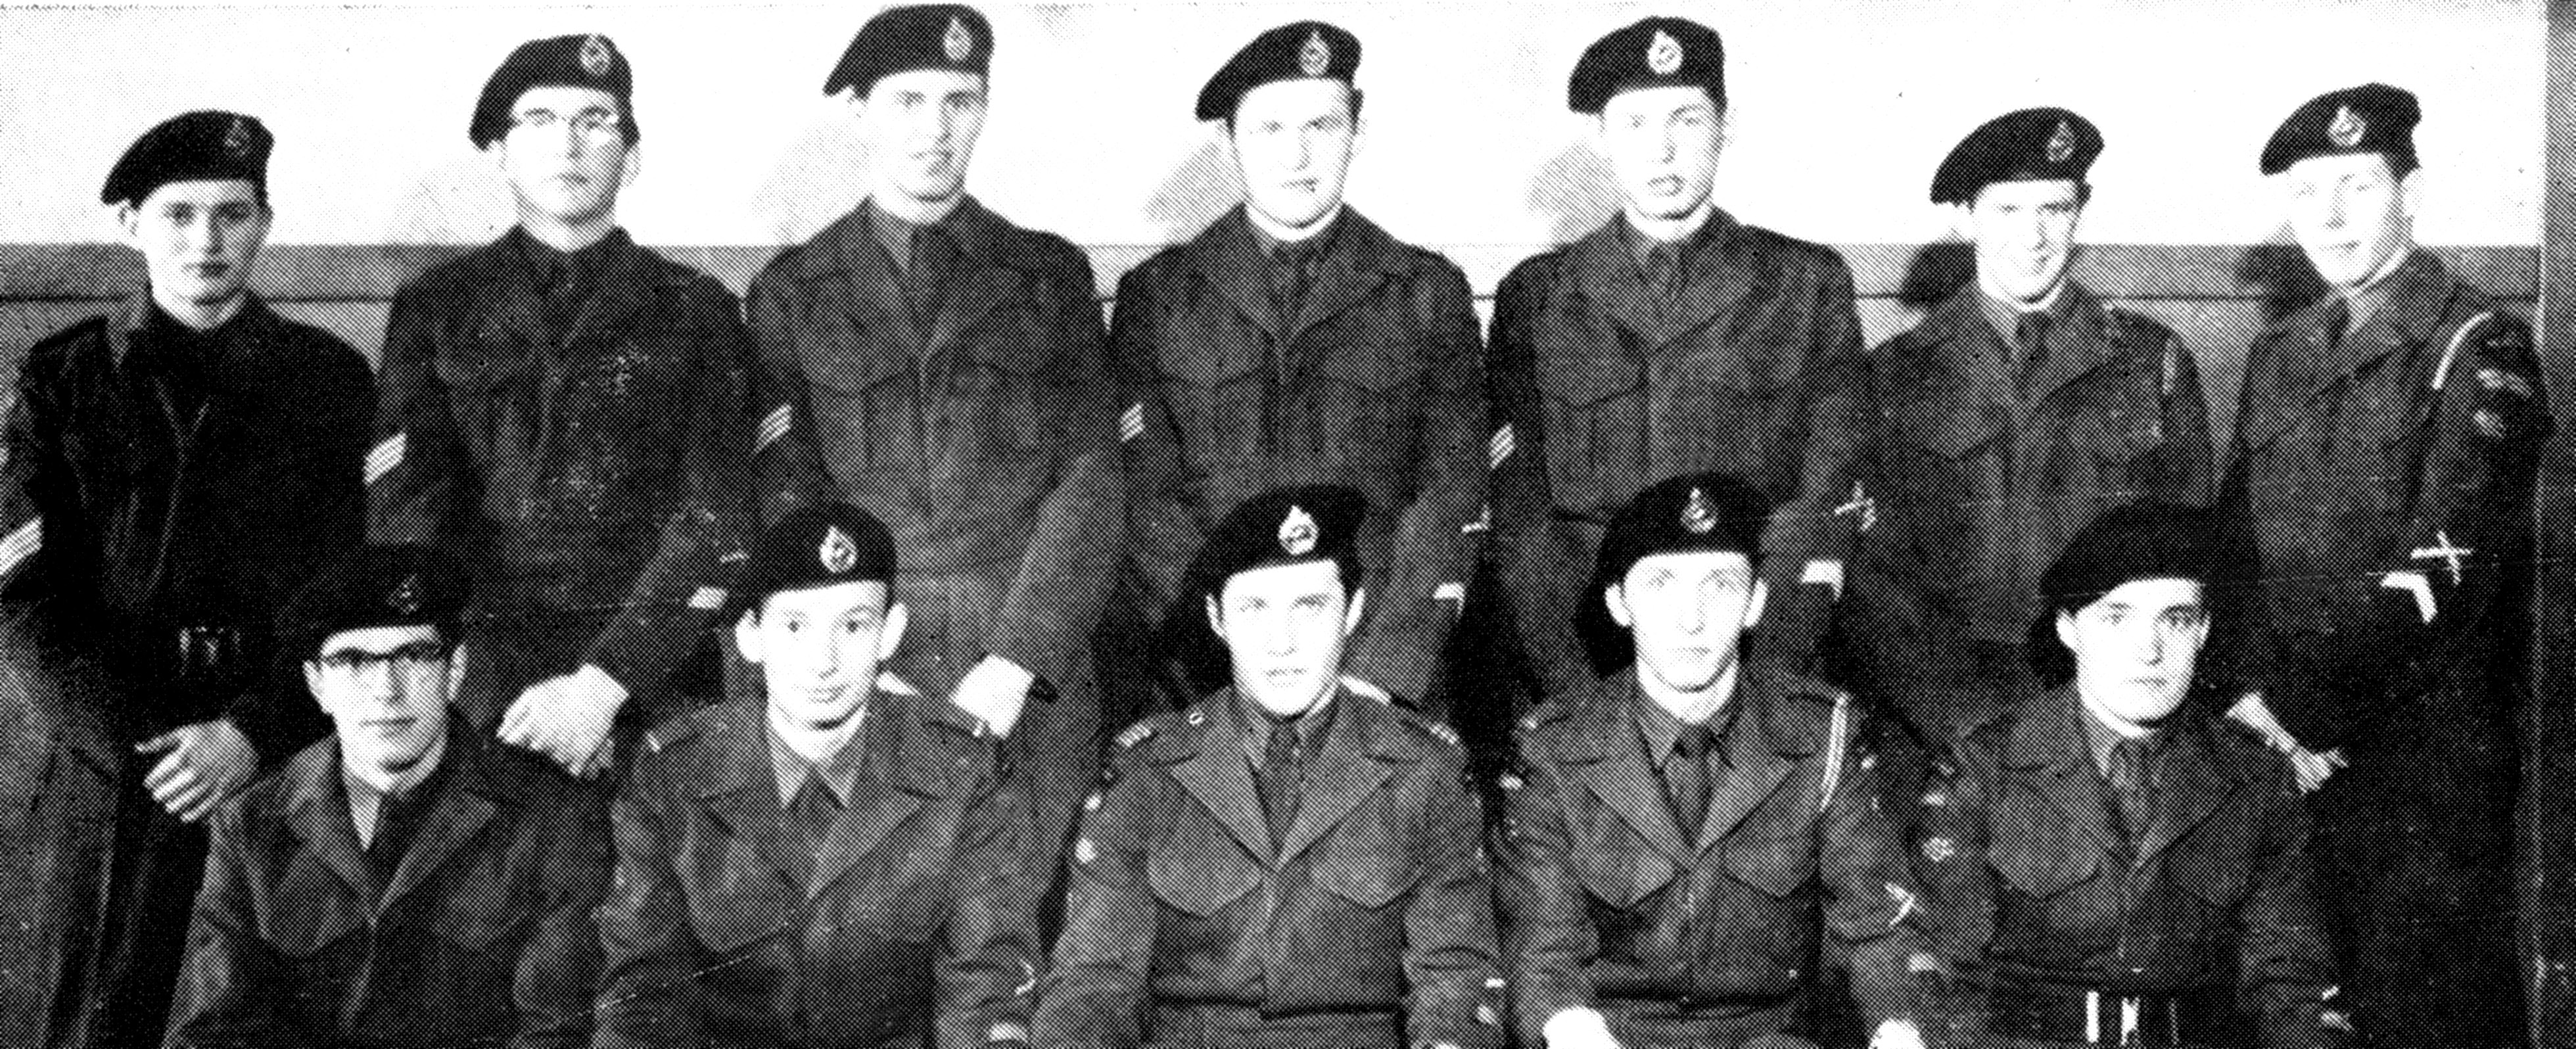 (Click to magnify) FRONT ROW: D. Arbuckle, D. Rothwell, G. Barton, J. Campbell, J. Kennedy; BACK ROW: R. Wallace, N. Taylor, G. Elliot, D. Culbert, G. Feasby, C. Todd, A. Thompson.